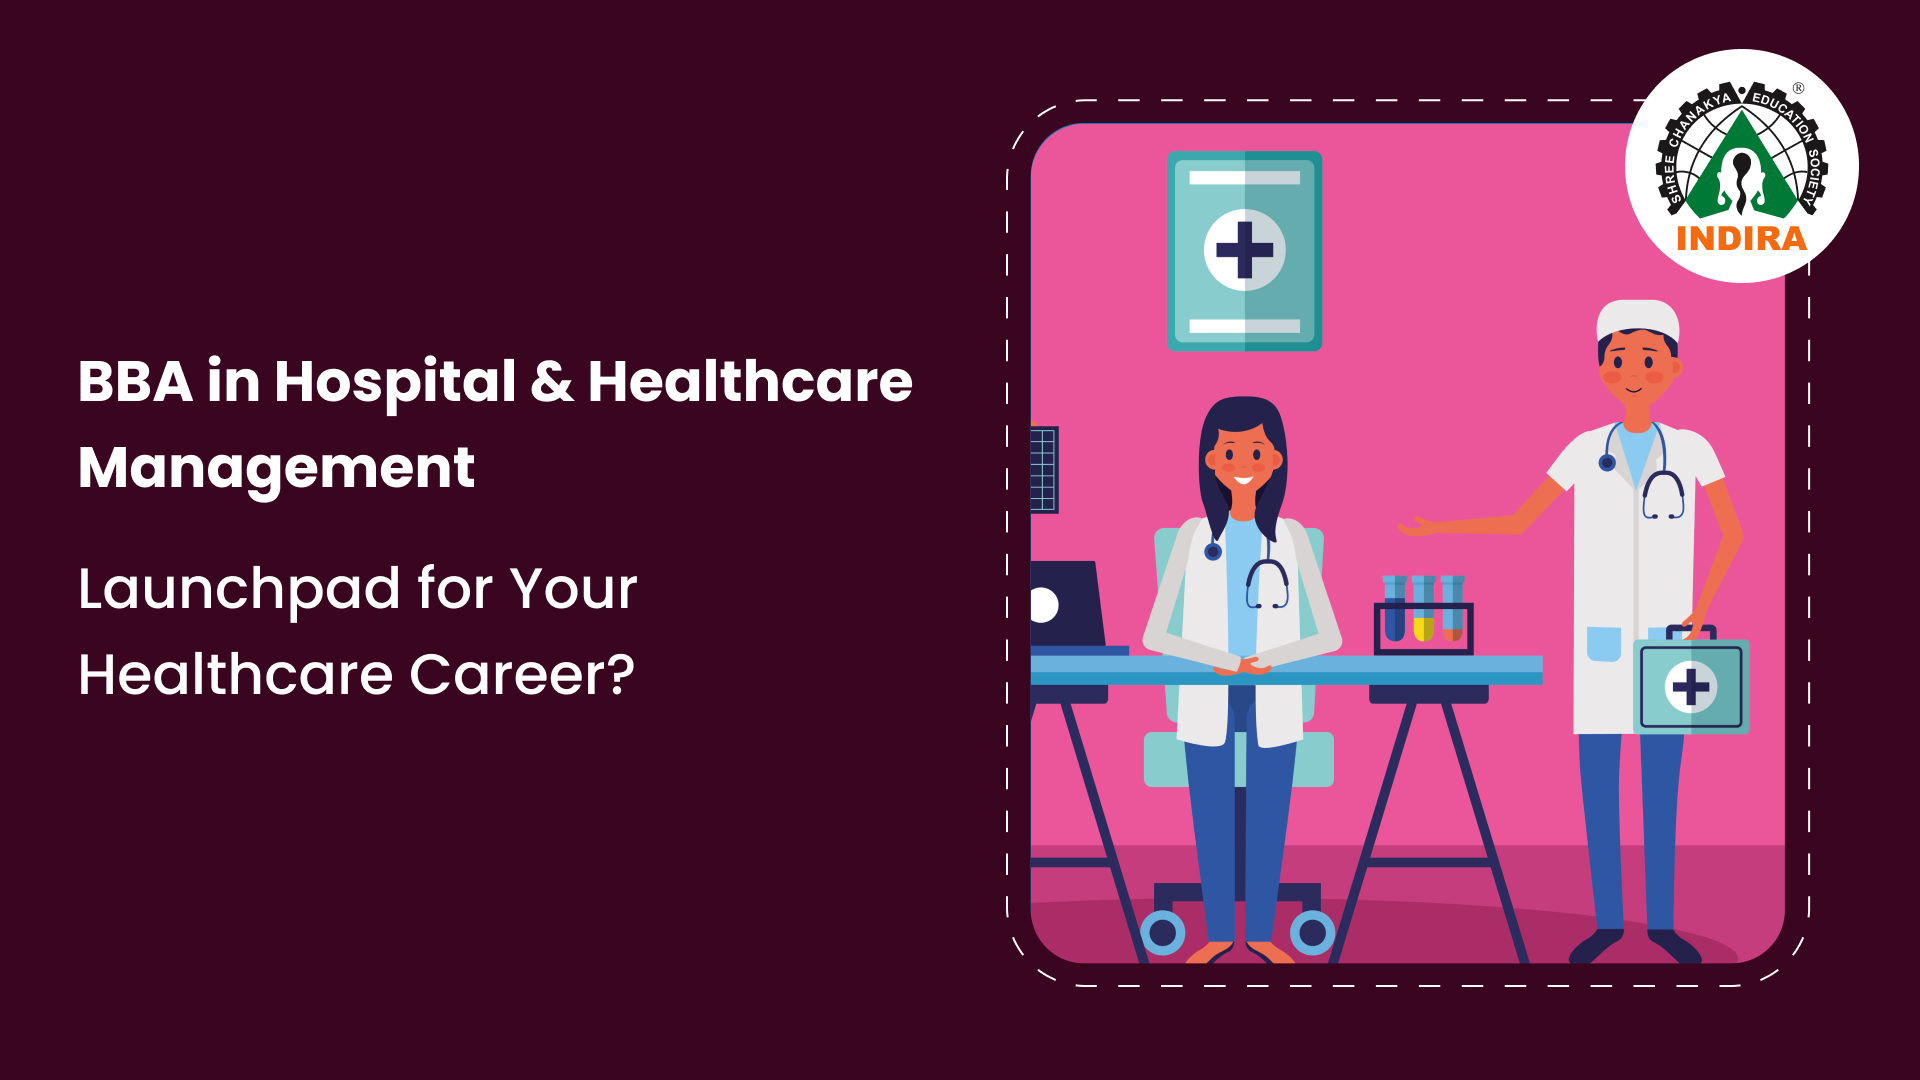  BBA in Hospital & Healthcare Management: Launchpad for Your Healthcare Career?